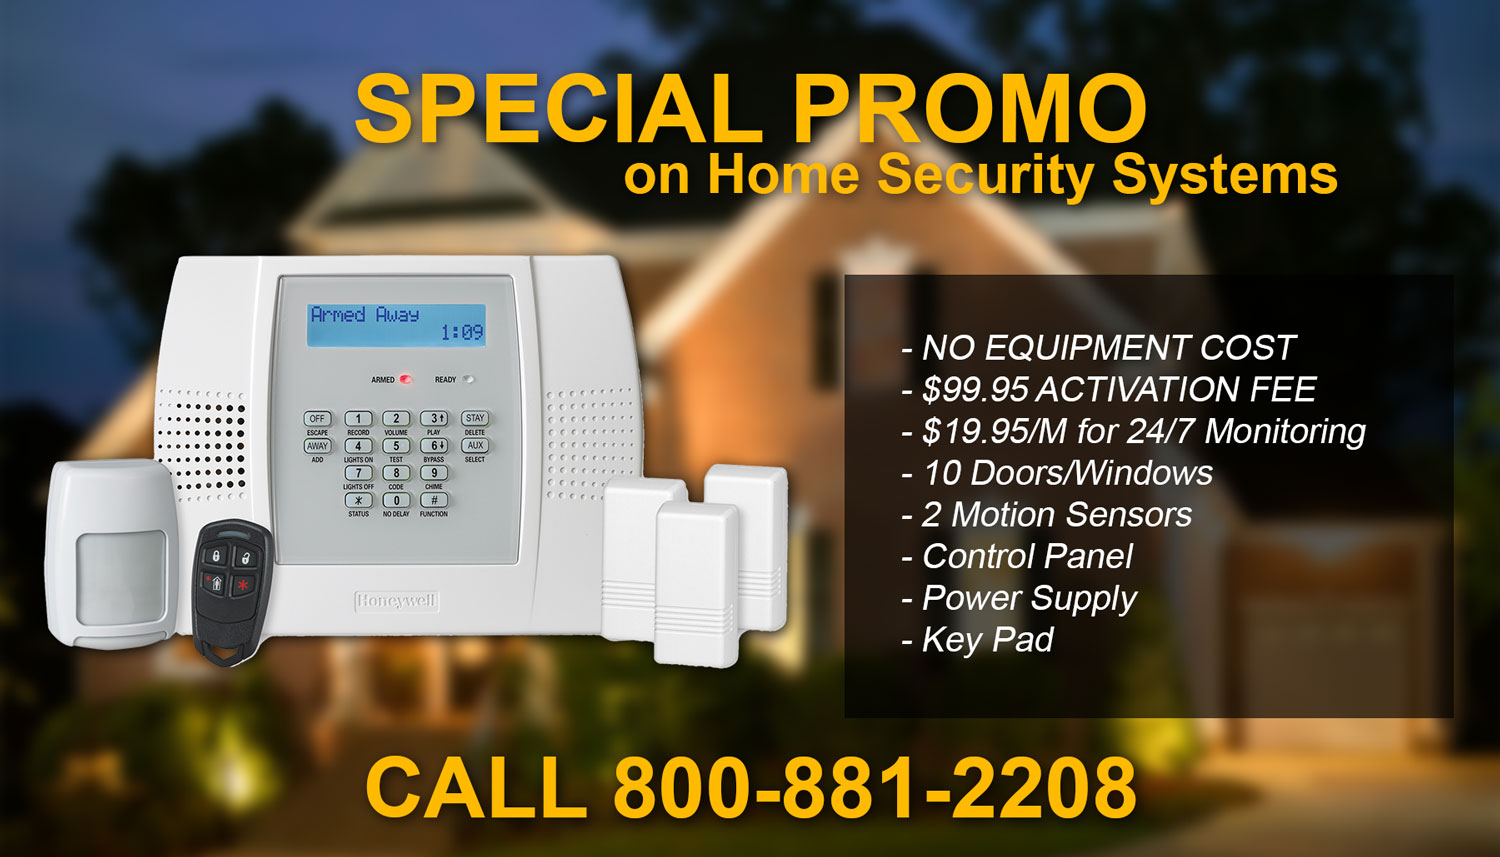 SPECIAL PROMO on Home Security System